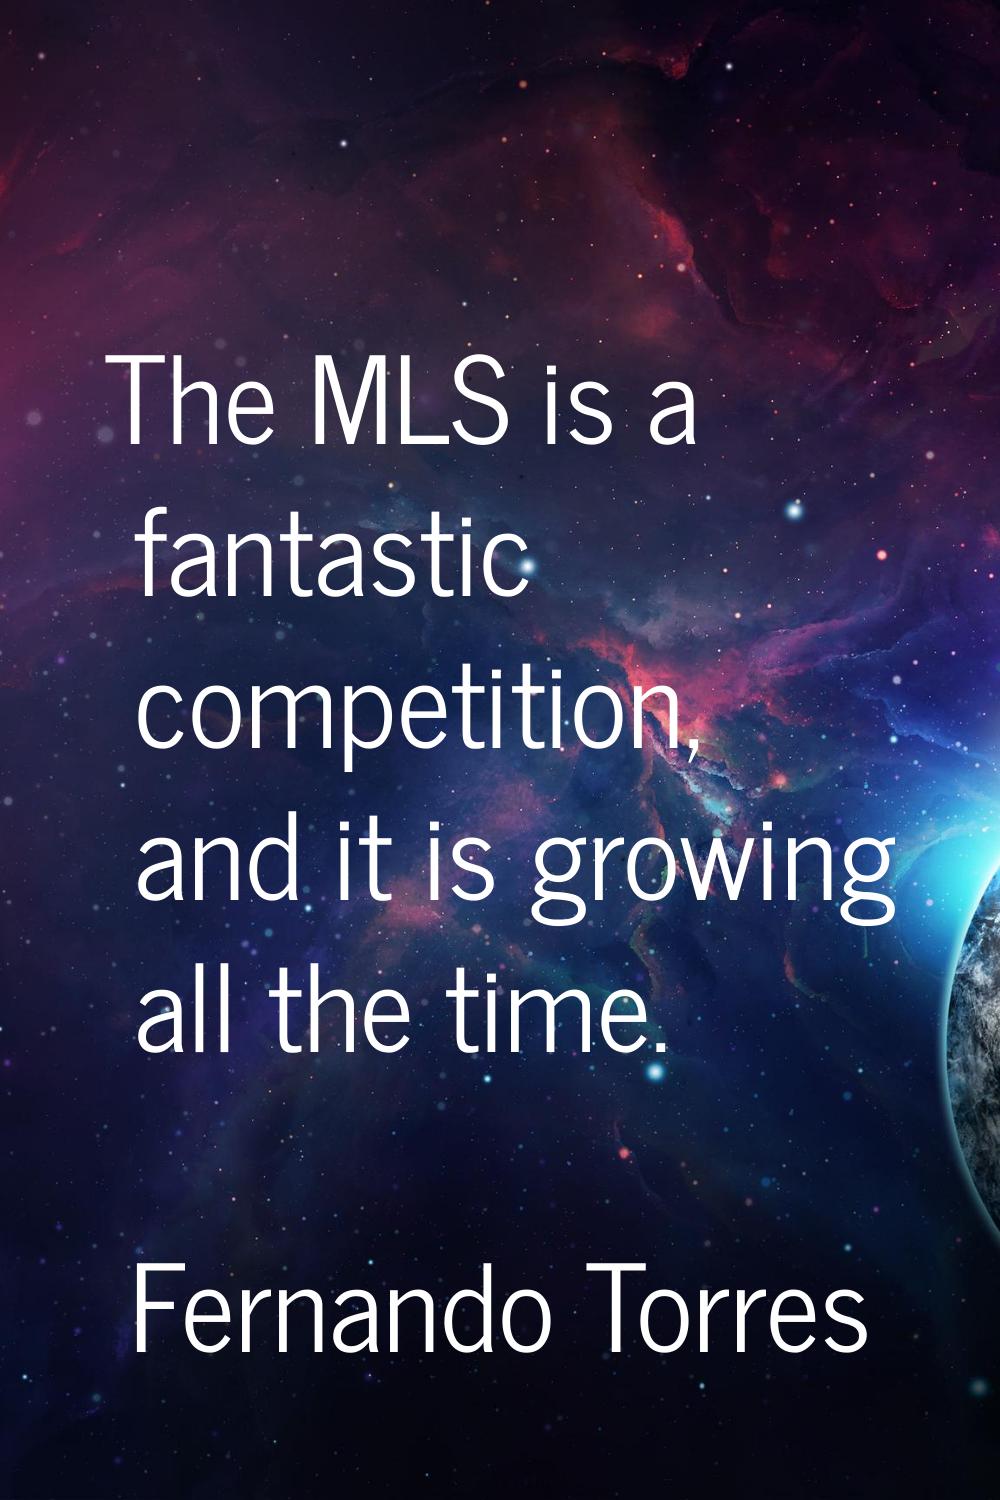 The MLS is a fantastic competition, and it is growing all the time.